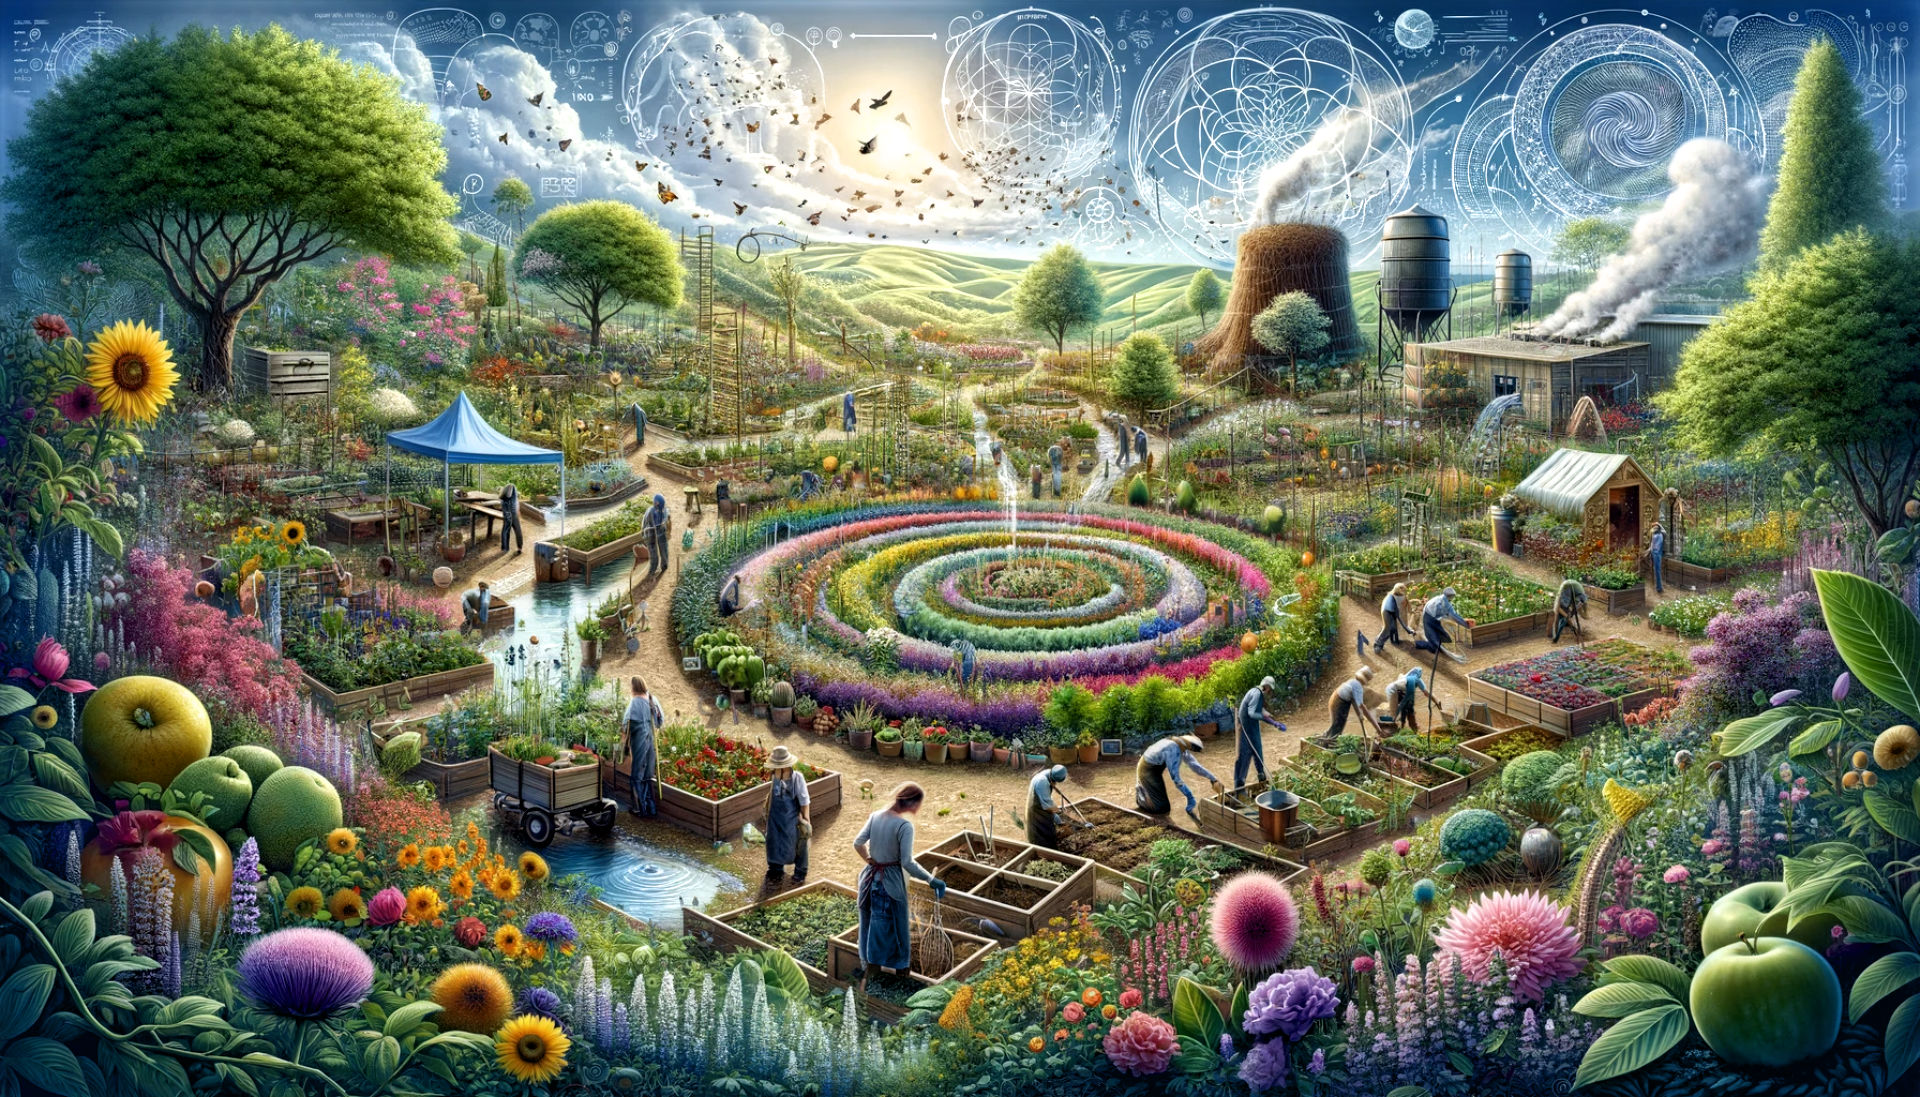 Create an image in your mind's eye that encapsulates the overarching theme of biodynamic gardening. This scene should include a panoramic view of a thriving biodynamic garden with a variety of plants, flowers, and trees. The garden should be buzzing with activity, featuring gardeners engaged in different tasks like planting, watering, and tending to the plants. The background could include elements symbolizing the holistic approach of biodynamic gardening, such as a compost heap, a beehive, and a water collection system. The overall atmosphere should be vibrant and life-affirming, portraying the garden as a self-sustaining ecosystem that is in harmony with nature.